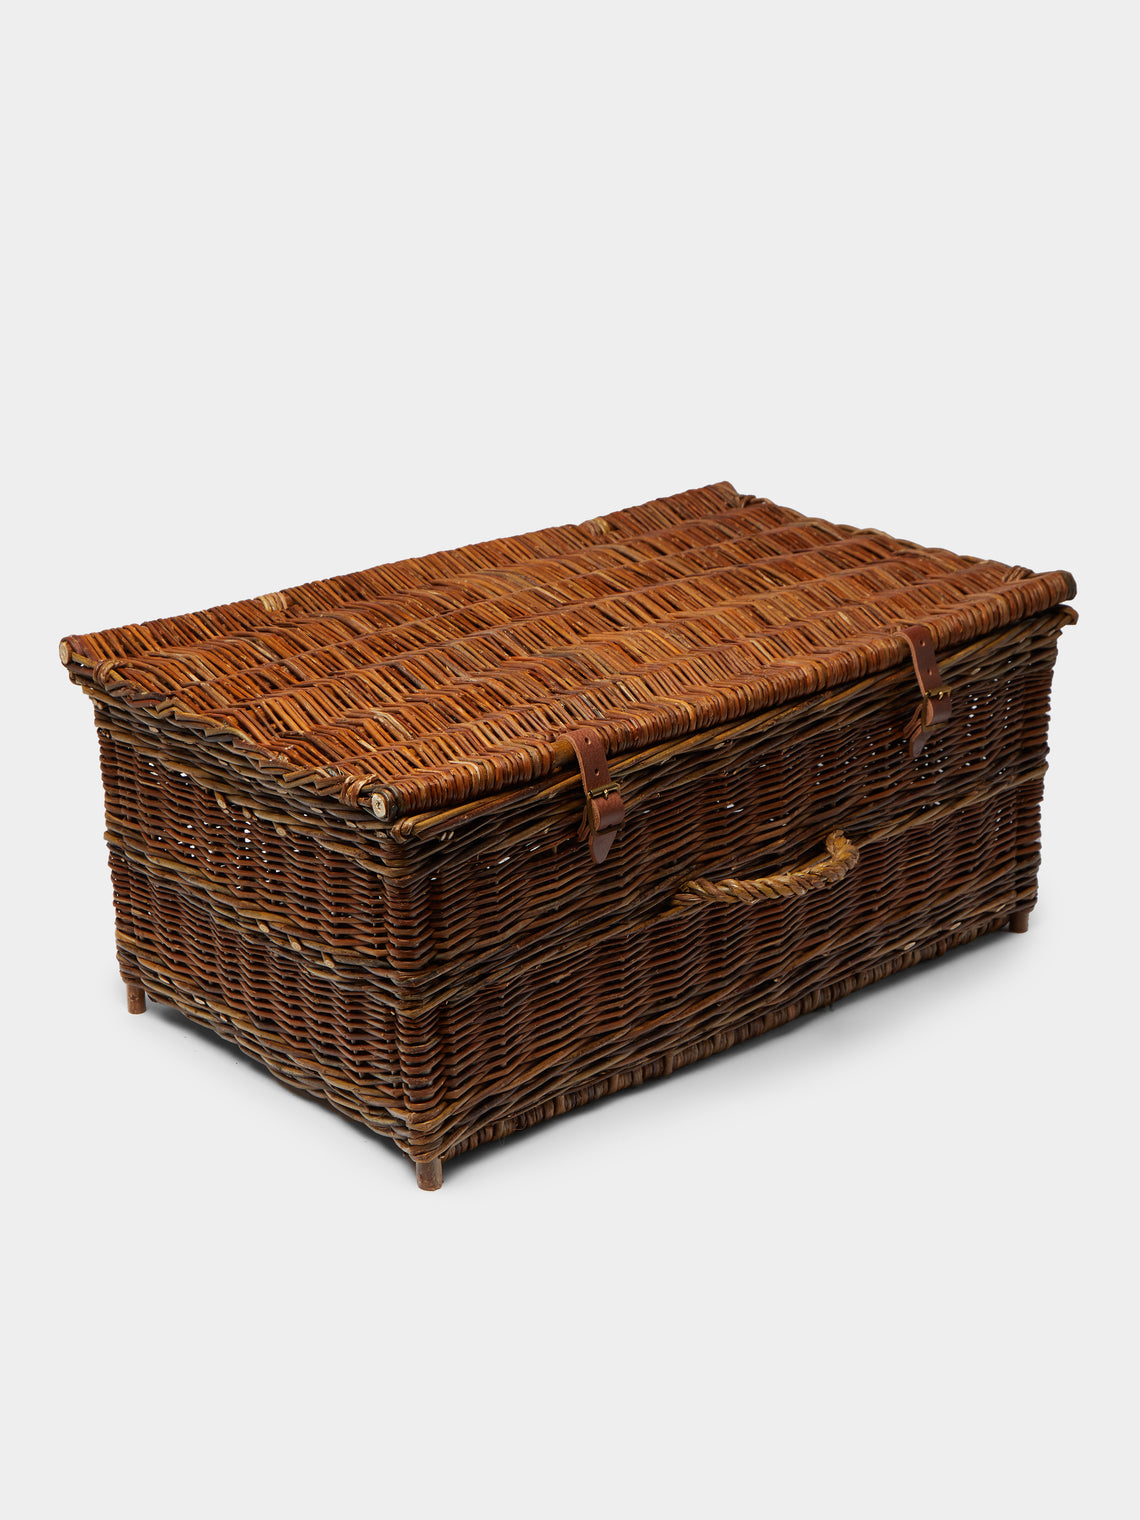 Sussex Willow Baskets - Handwoven Willow Picnic Basket -  - ABASK